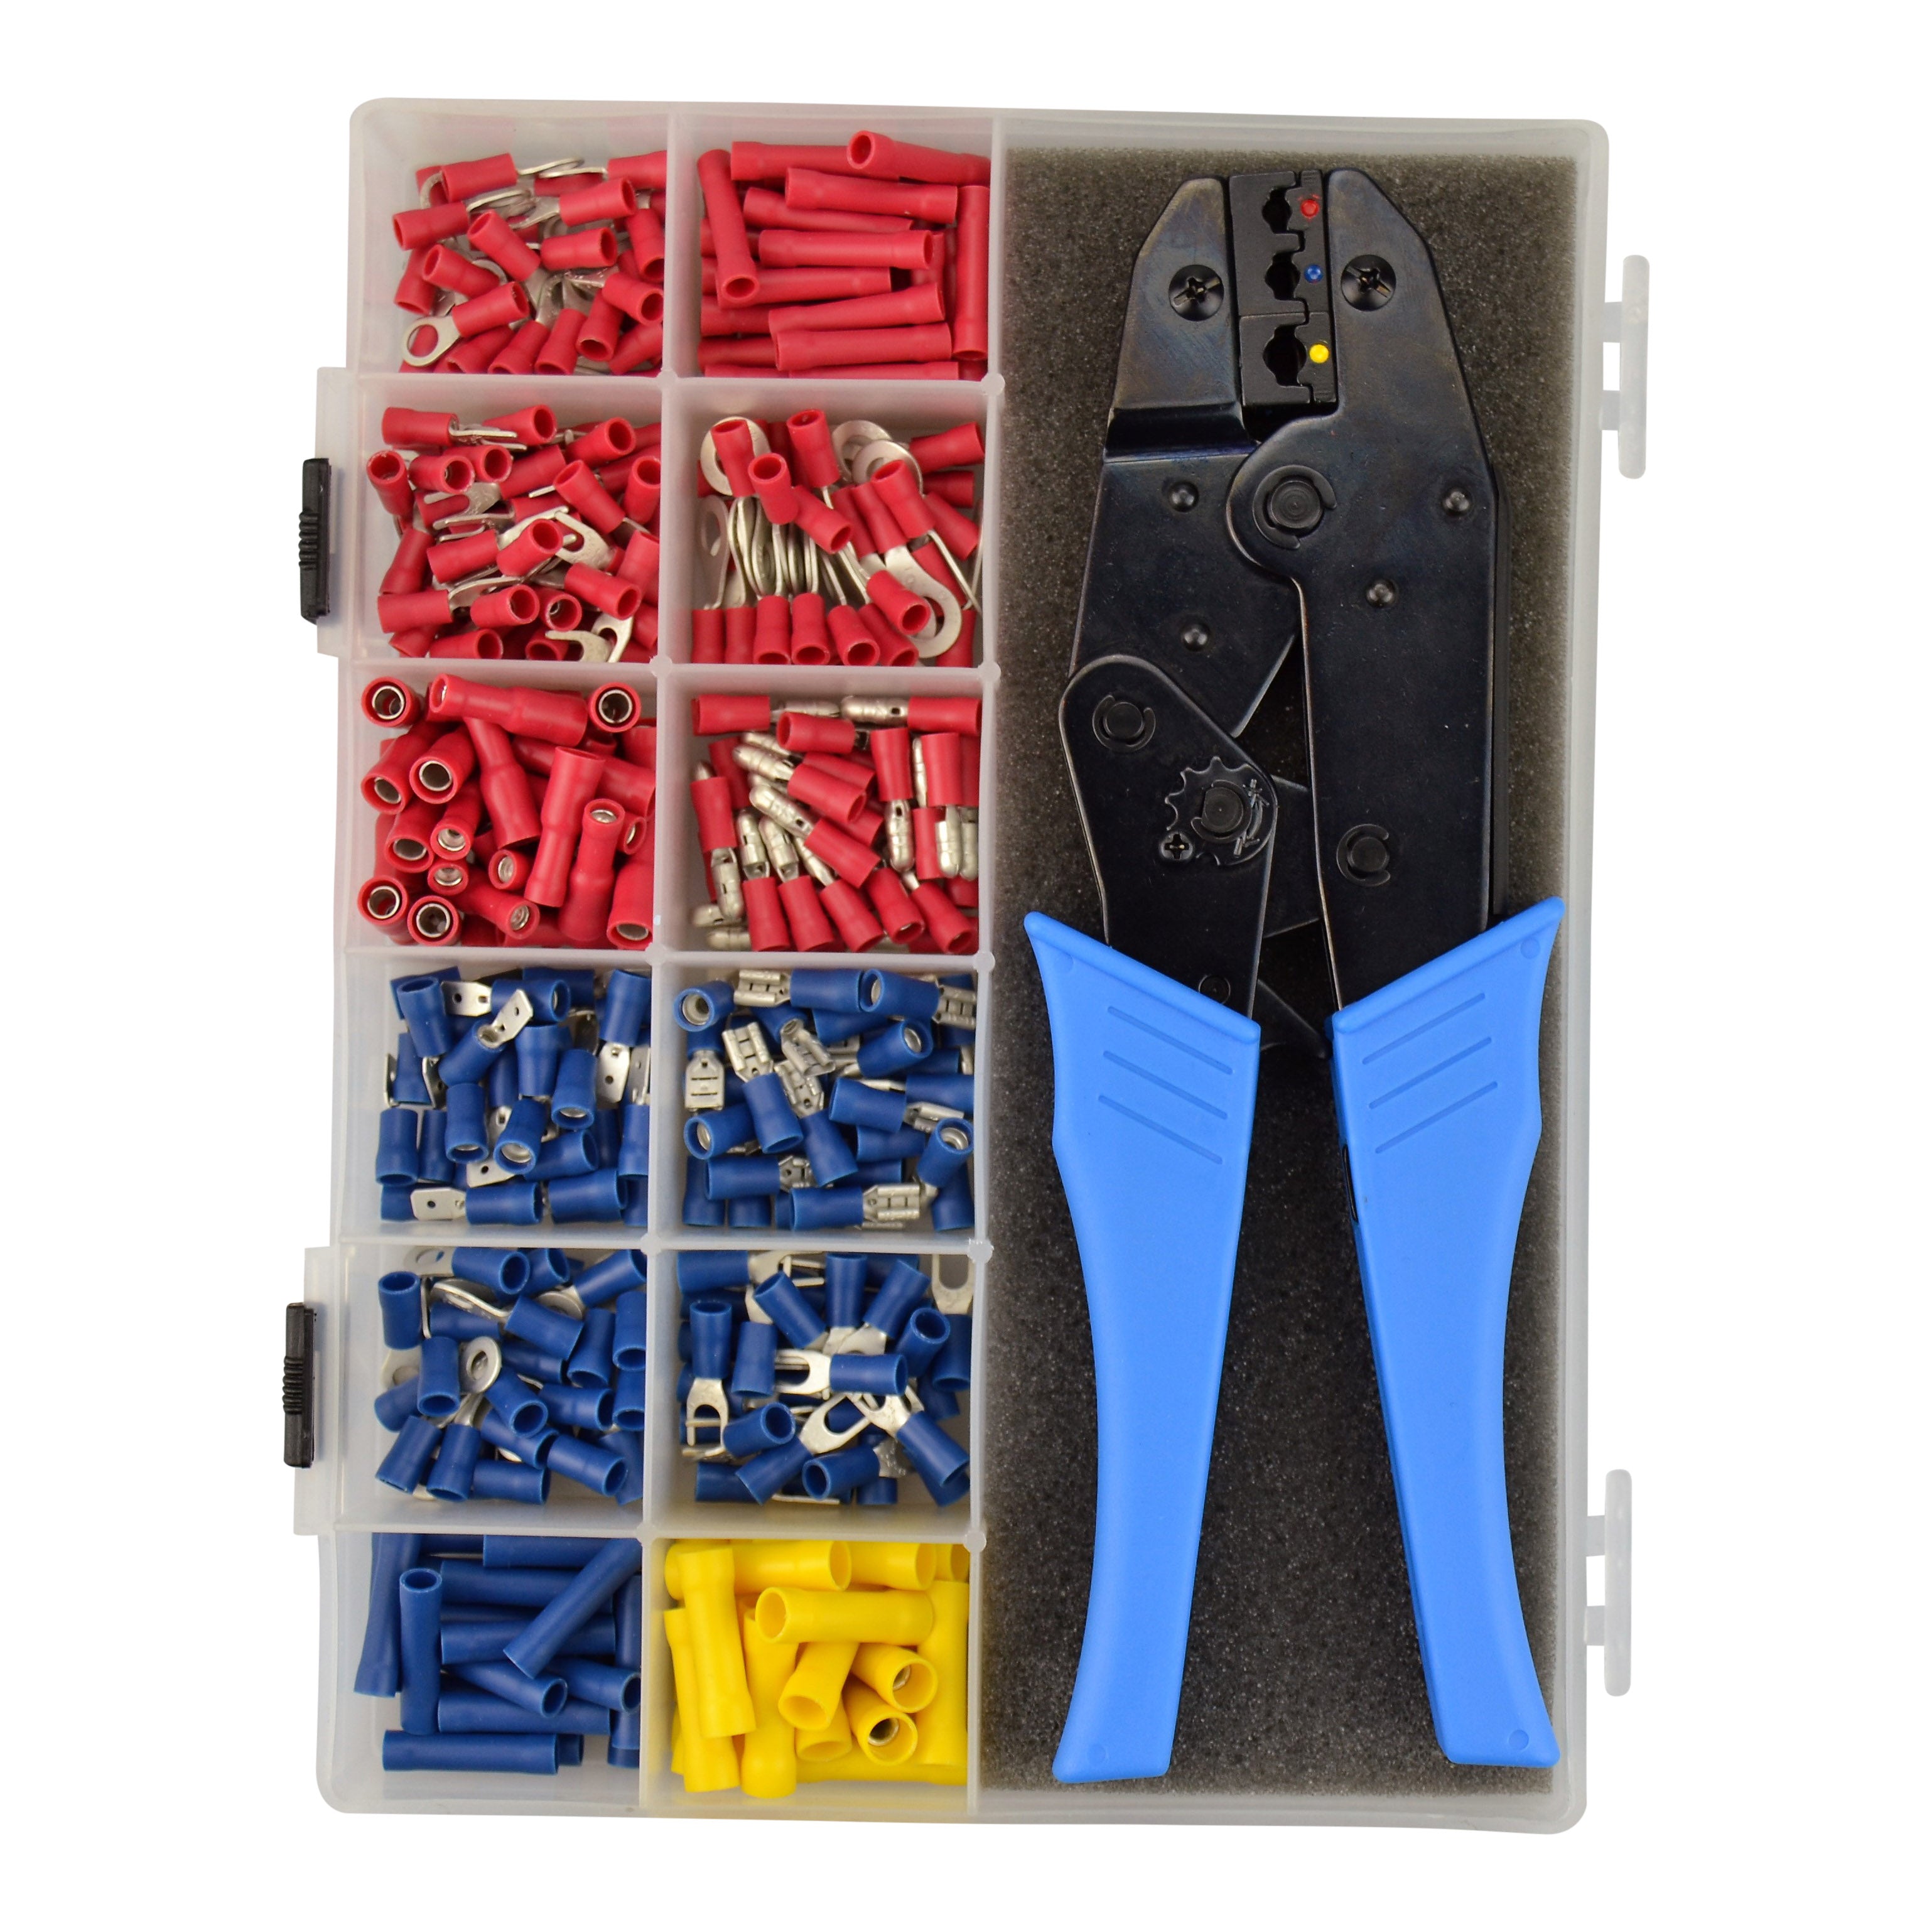 Red, Blue & Yellow Pre-Insulated Crimp Terminal Assortment Kit Including High Quality Ratchet Hand Tool - 360pcs Total